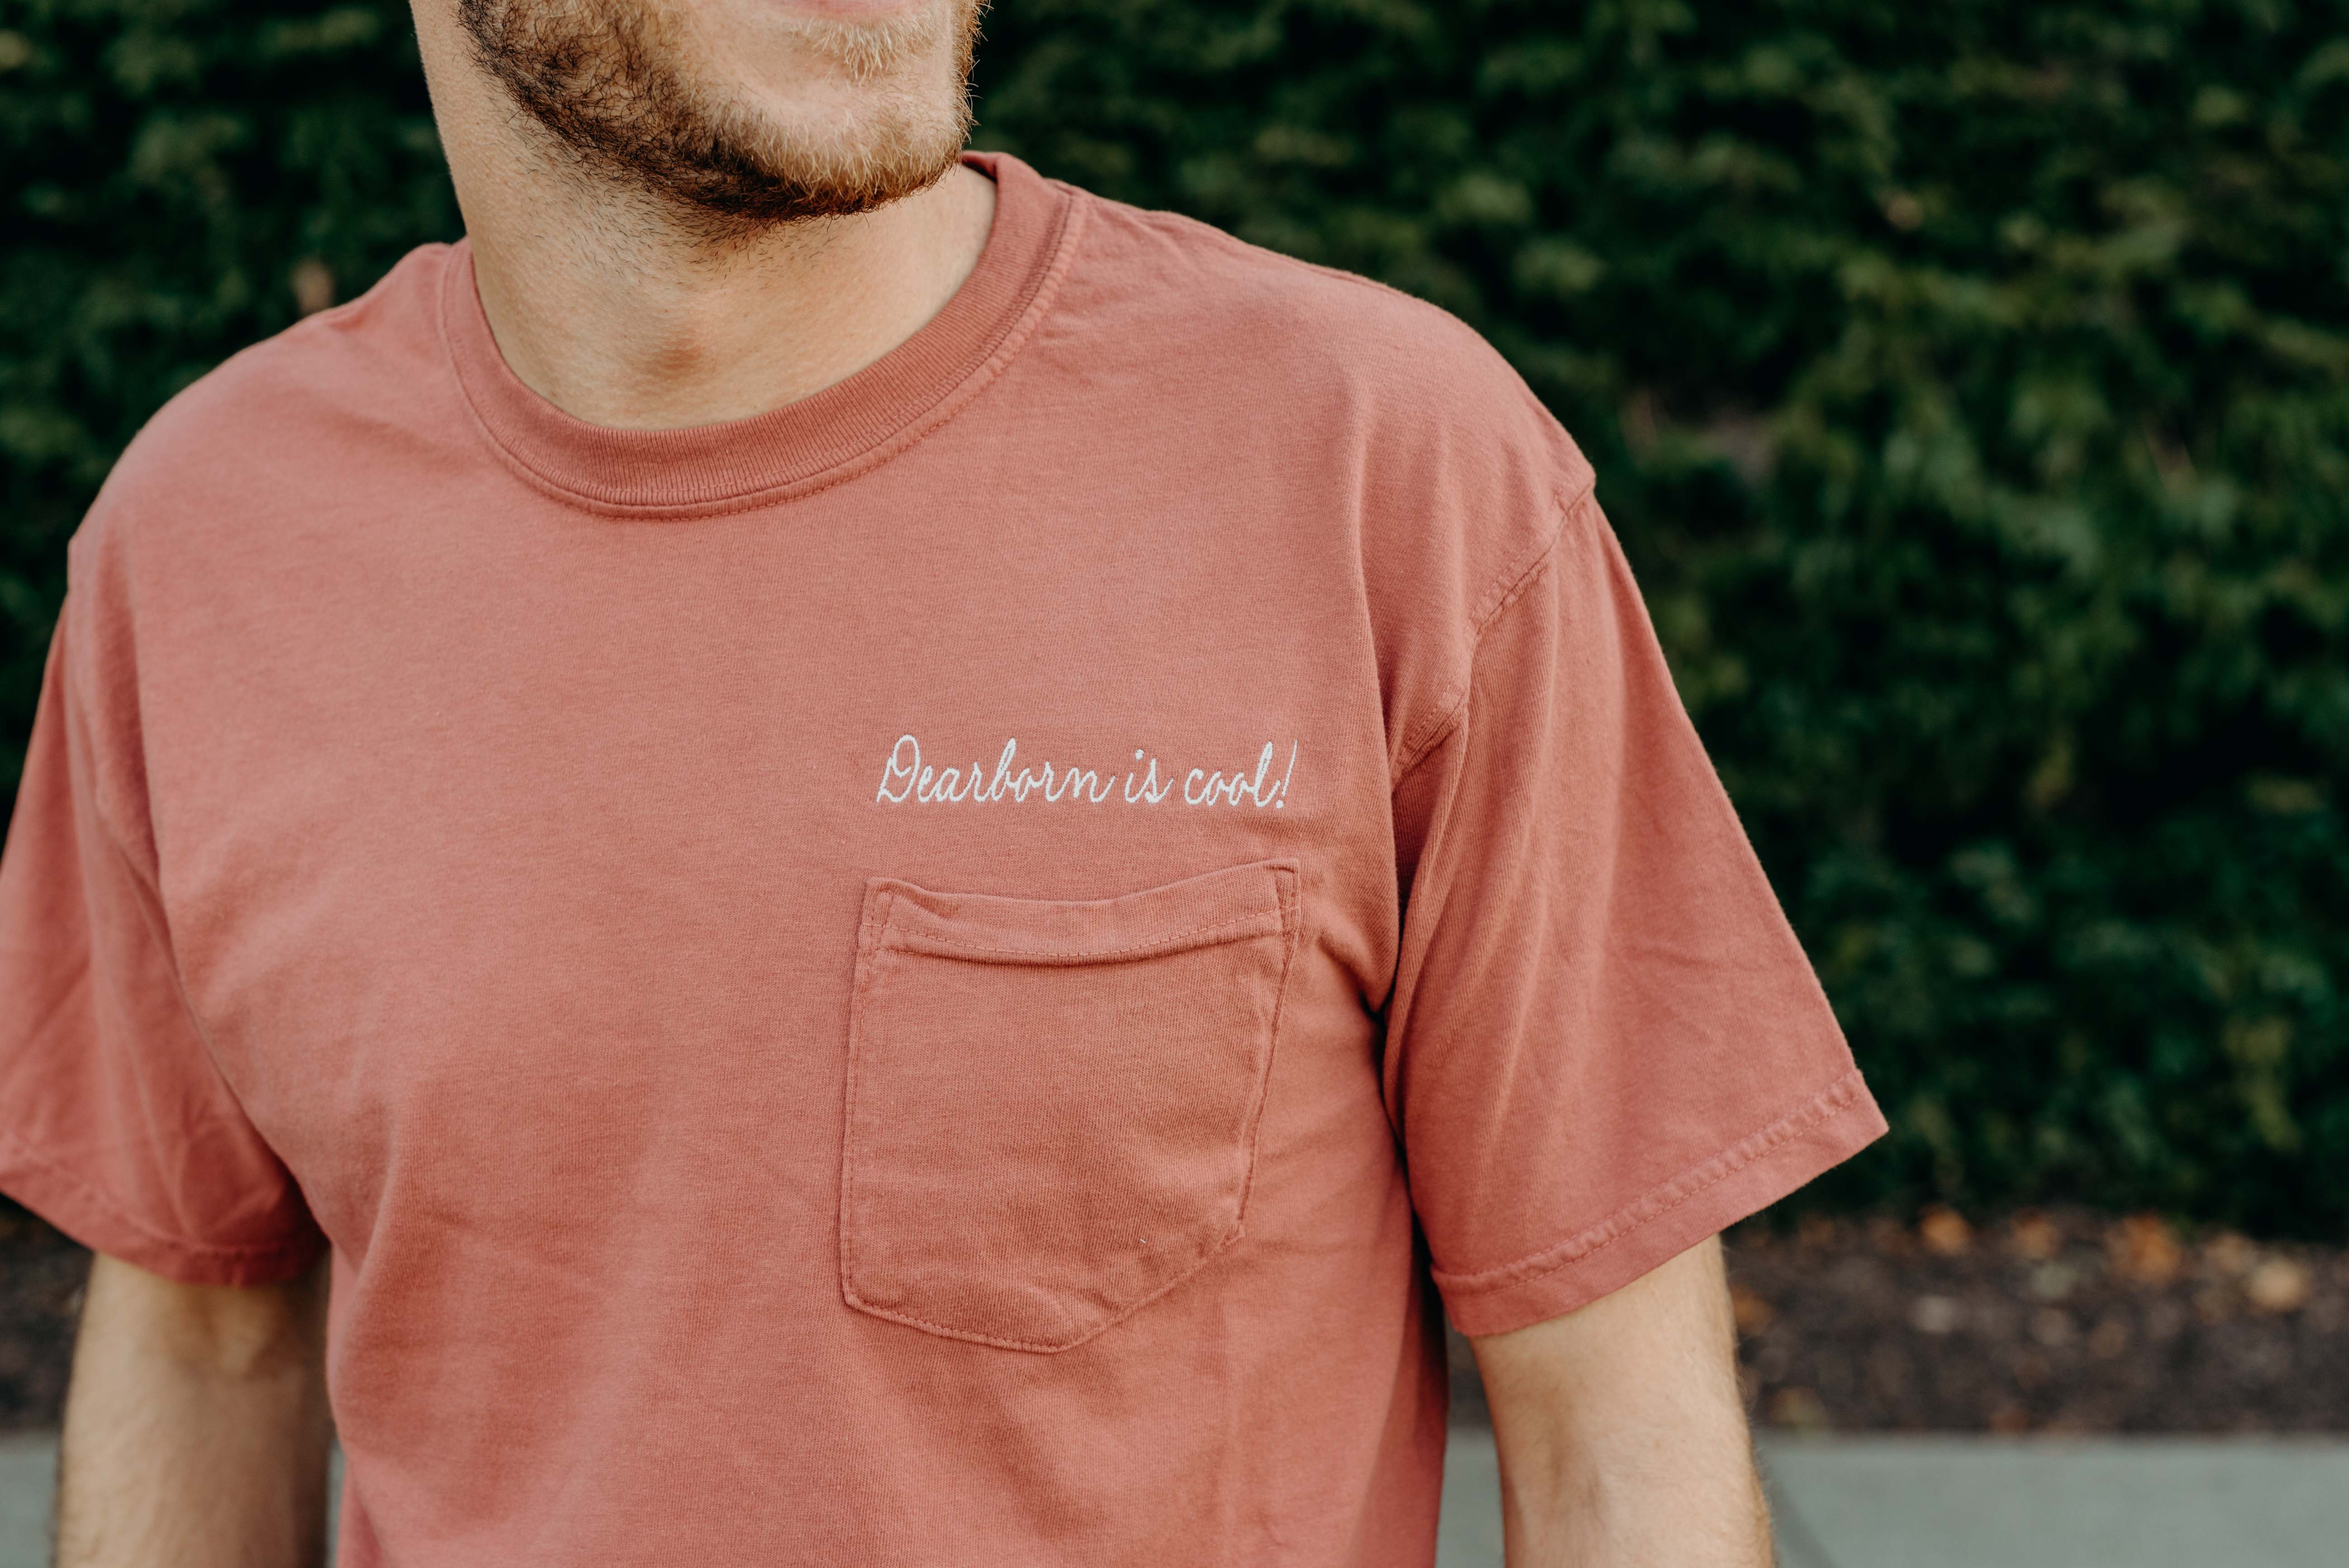 Embroidered pocket tee | Dearborn is Cool